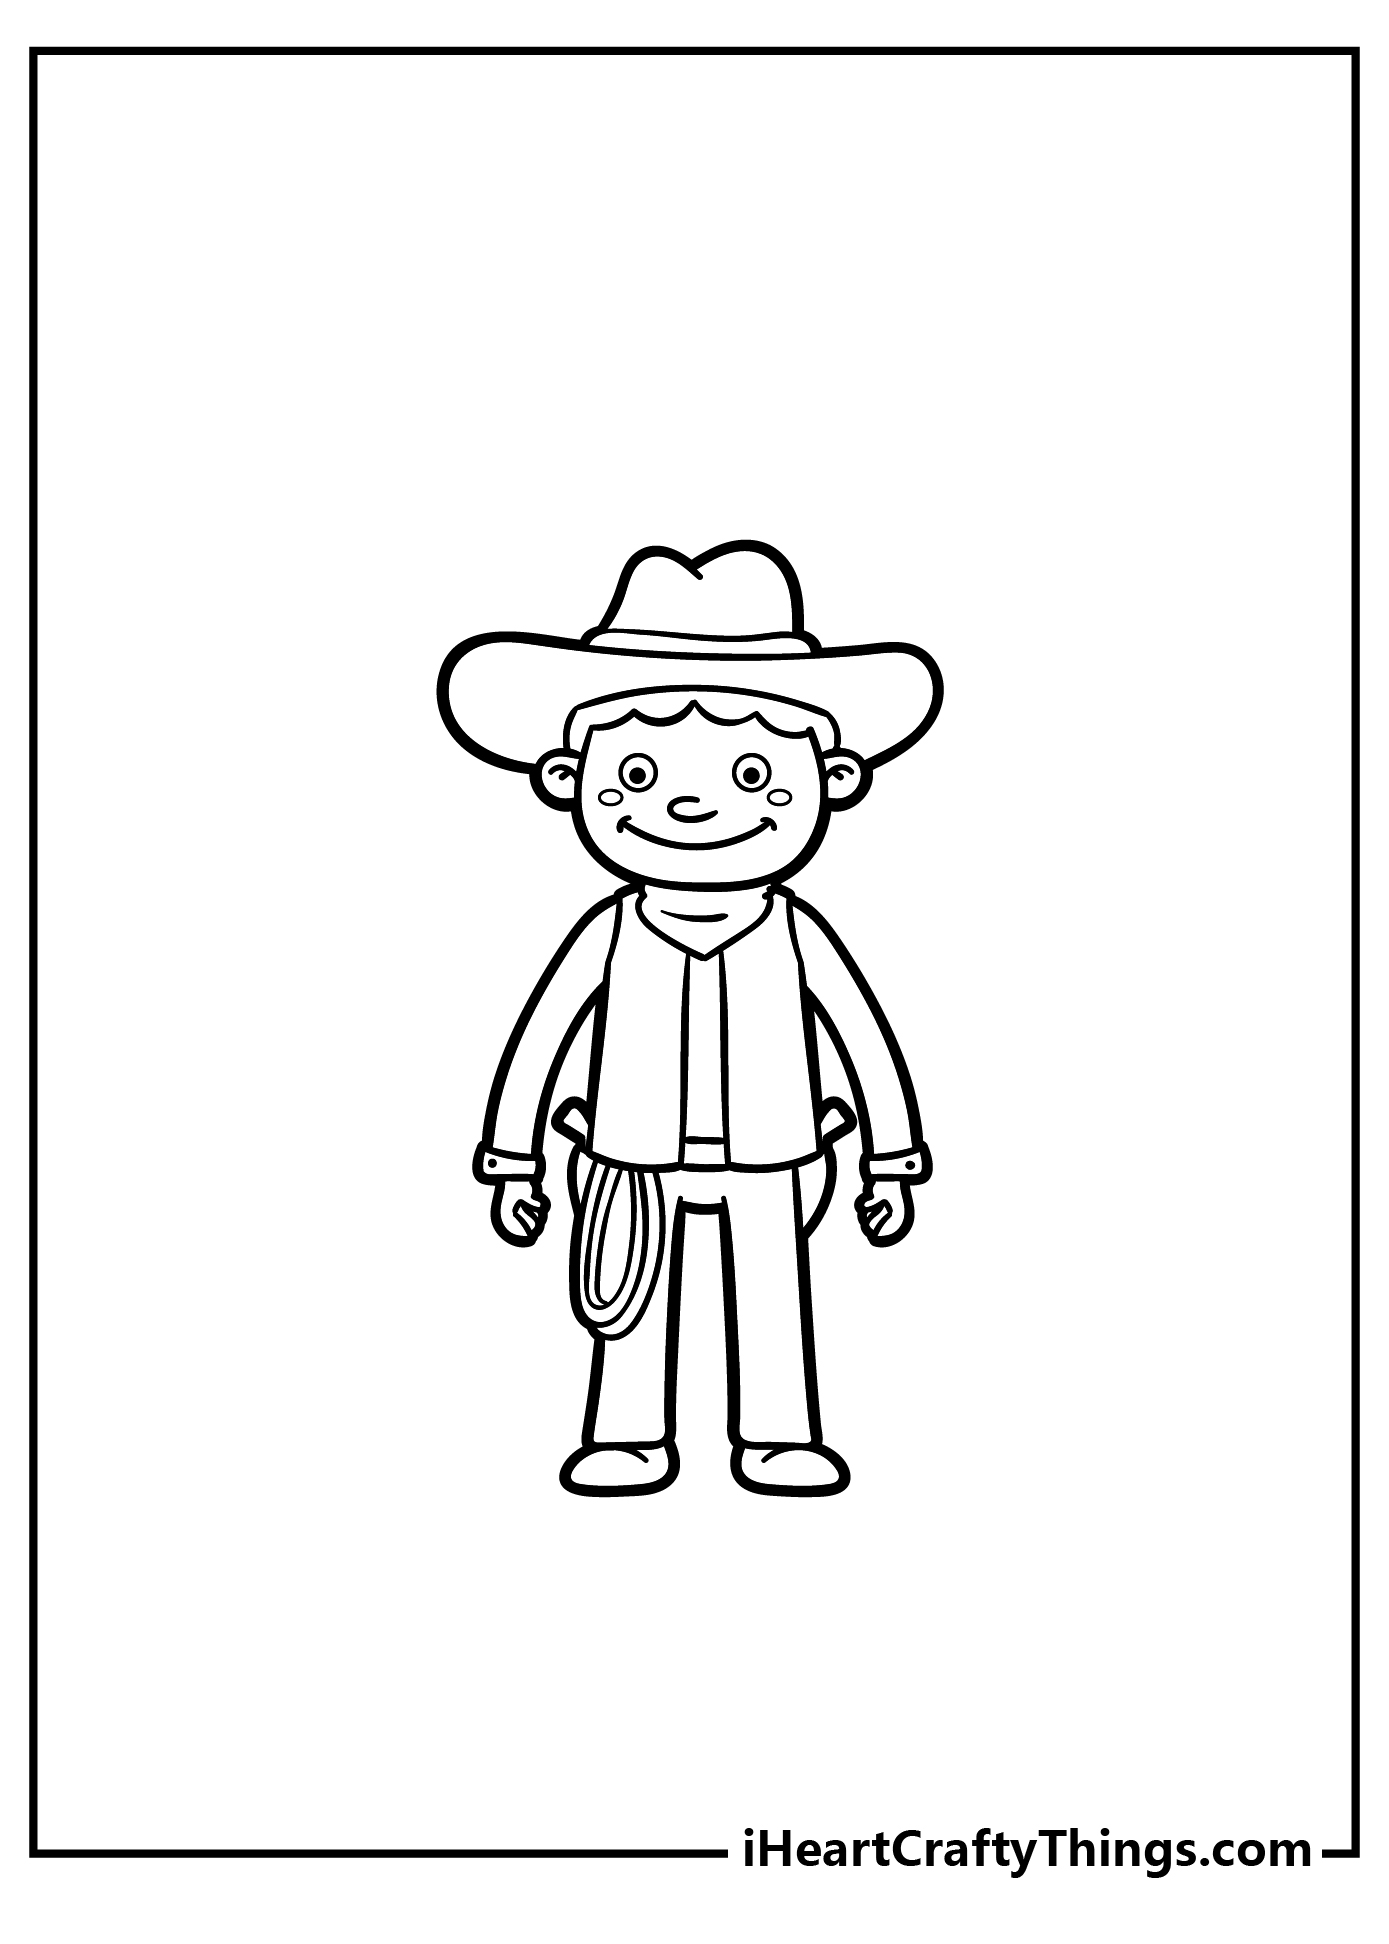 Cowboy Coloring Book for kids free printable